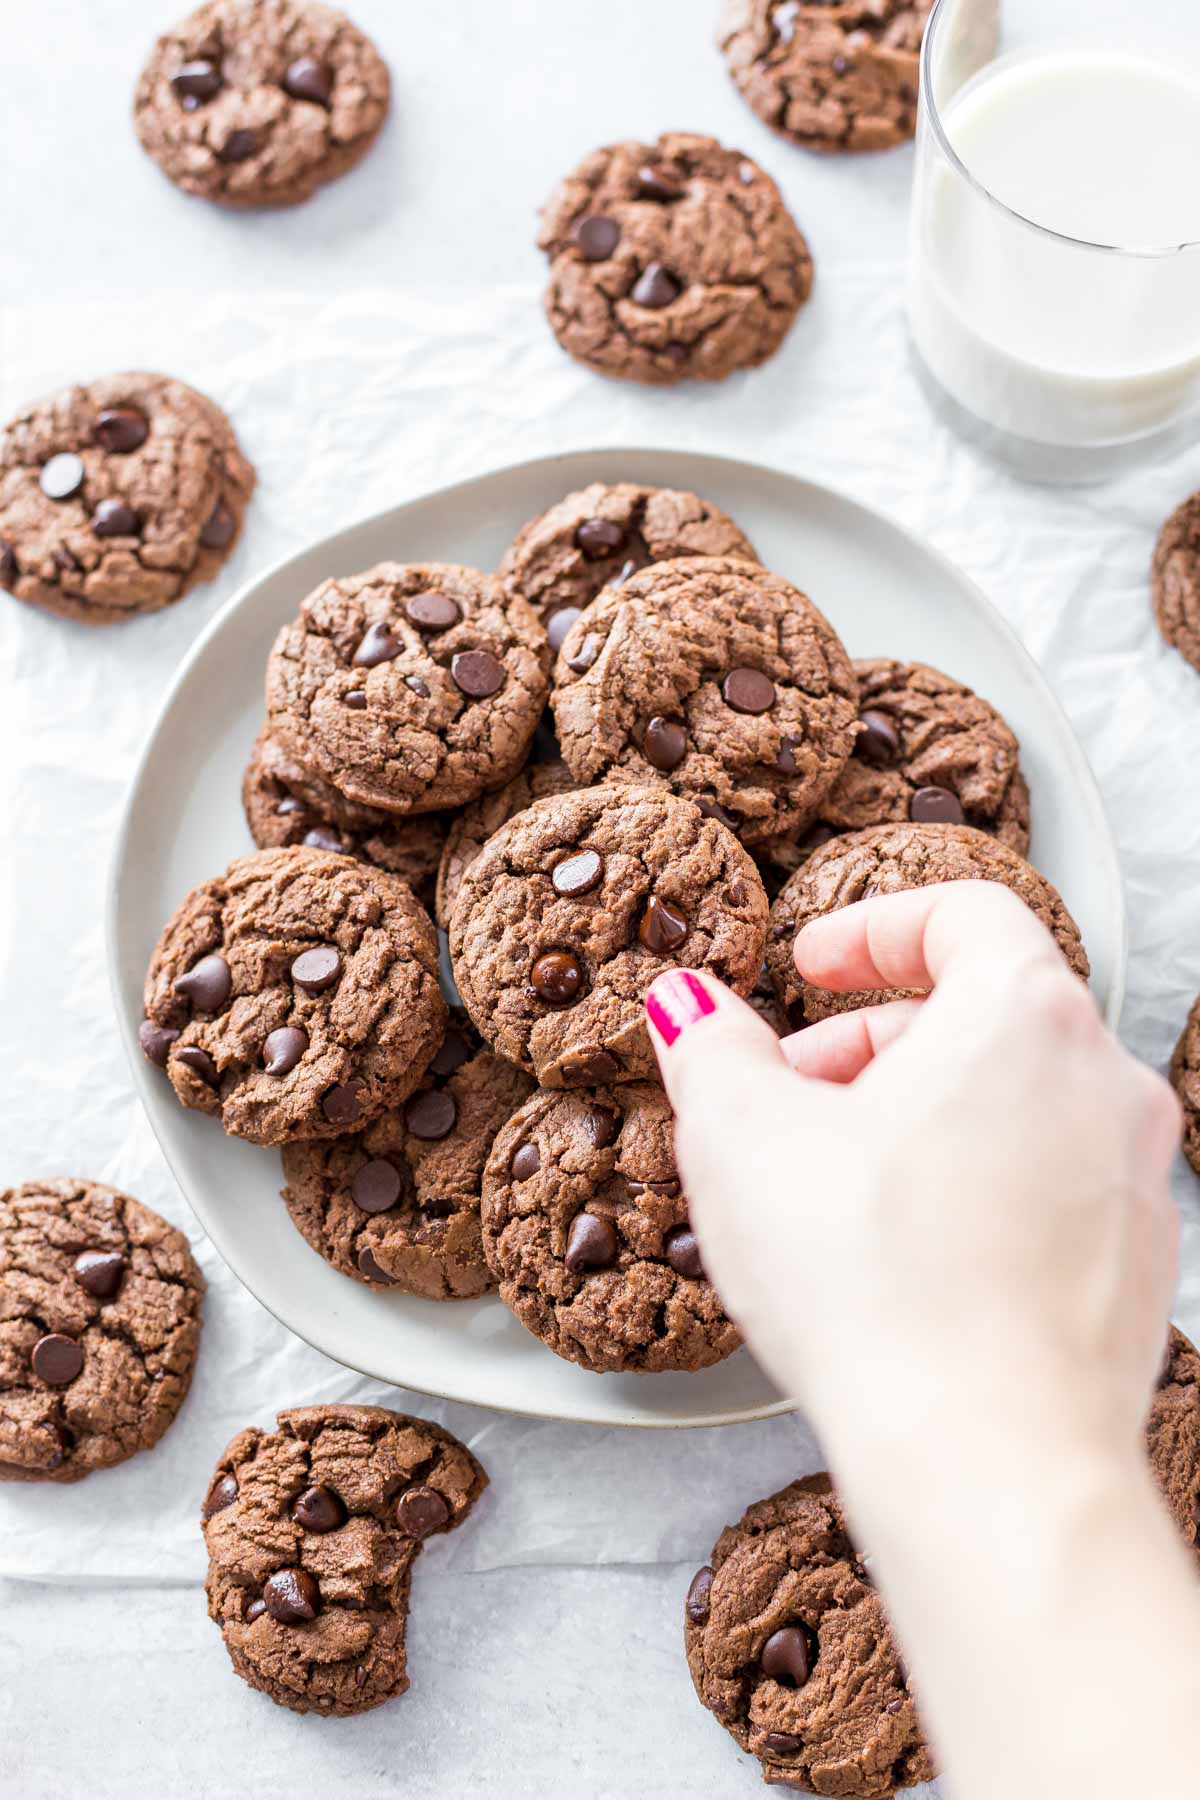 a hand reaching for chocolate chocolate chip cookies on a plate surrounded by more cookies and short glass of almond milk